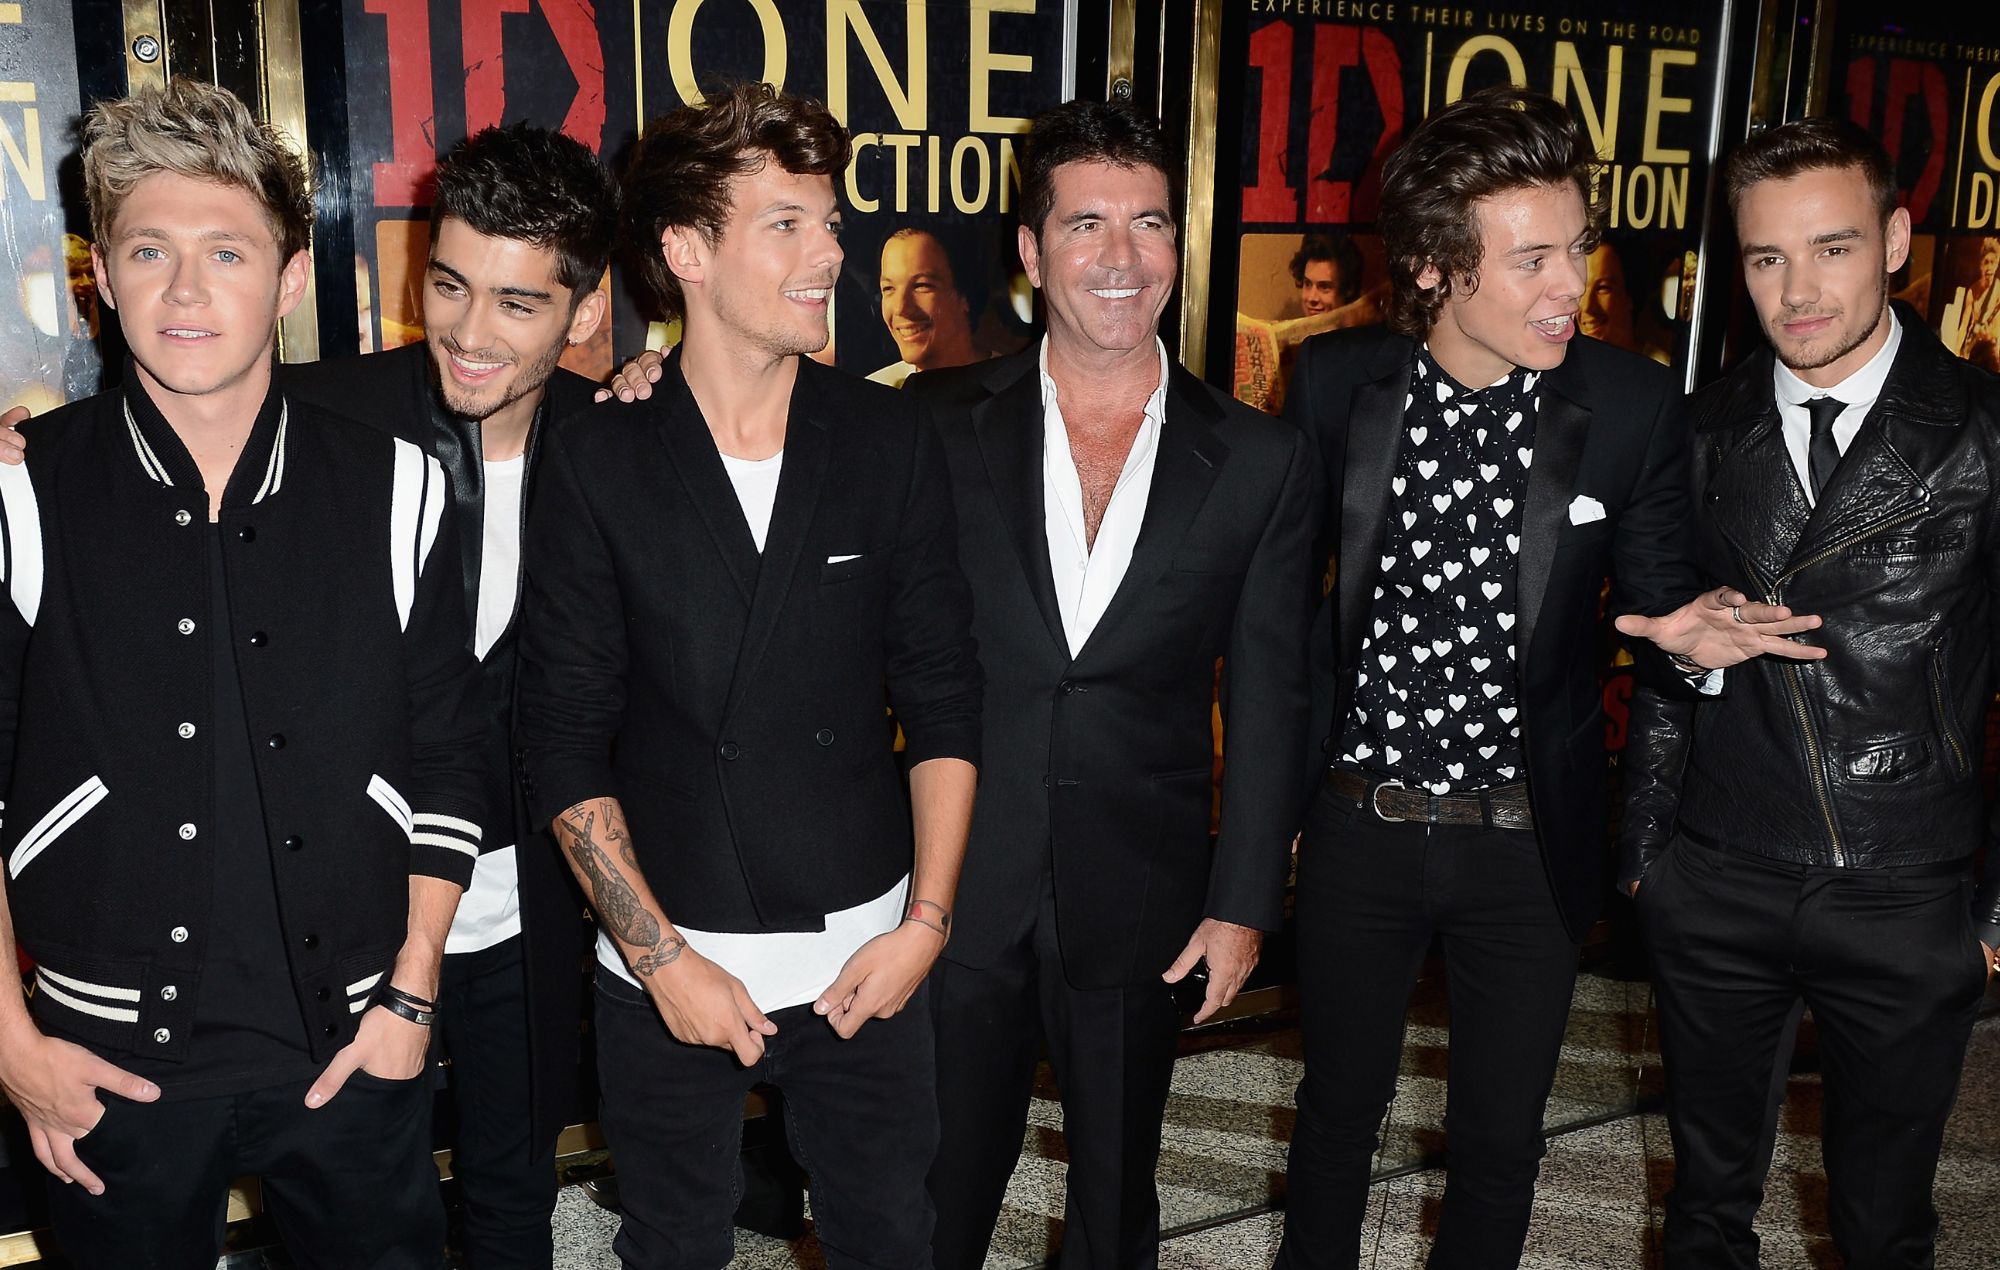 Simon Cowell on the chances of a One Direction reunion and why he wishes he could still profit from their name